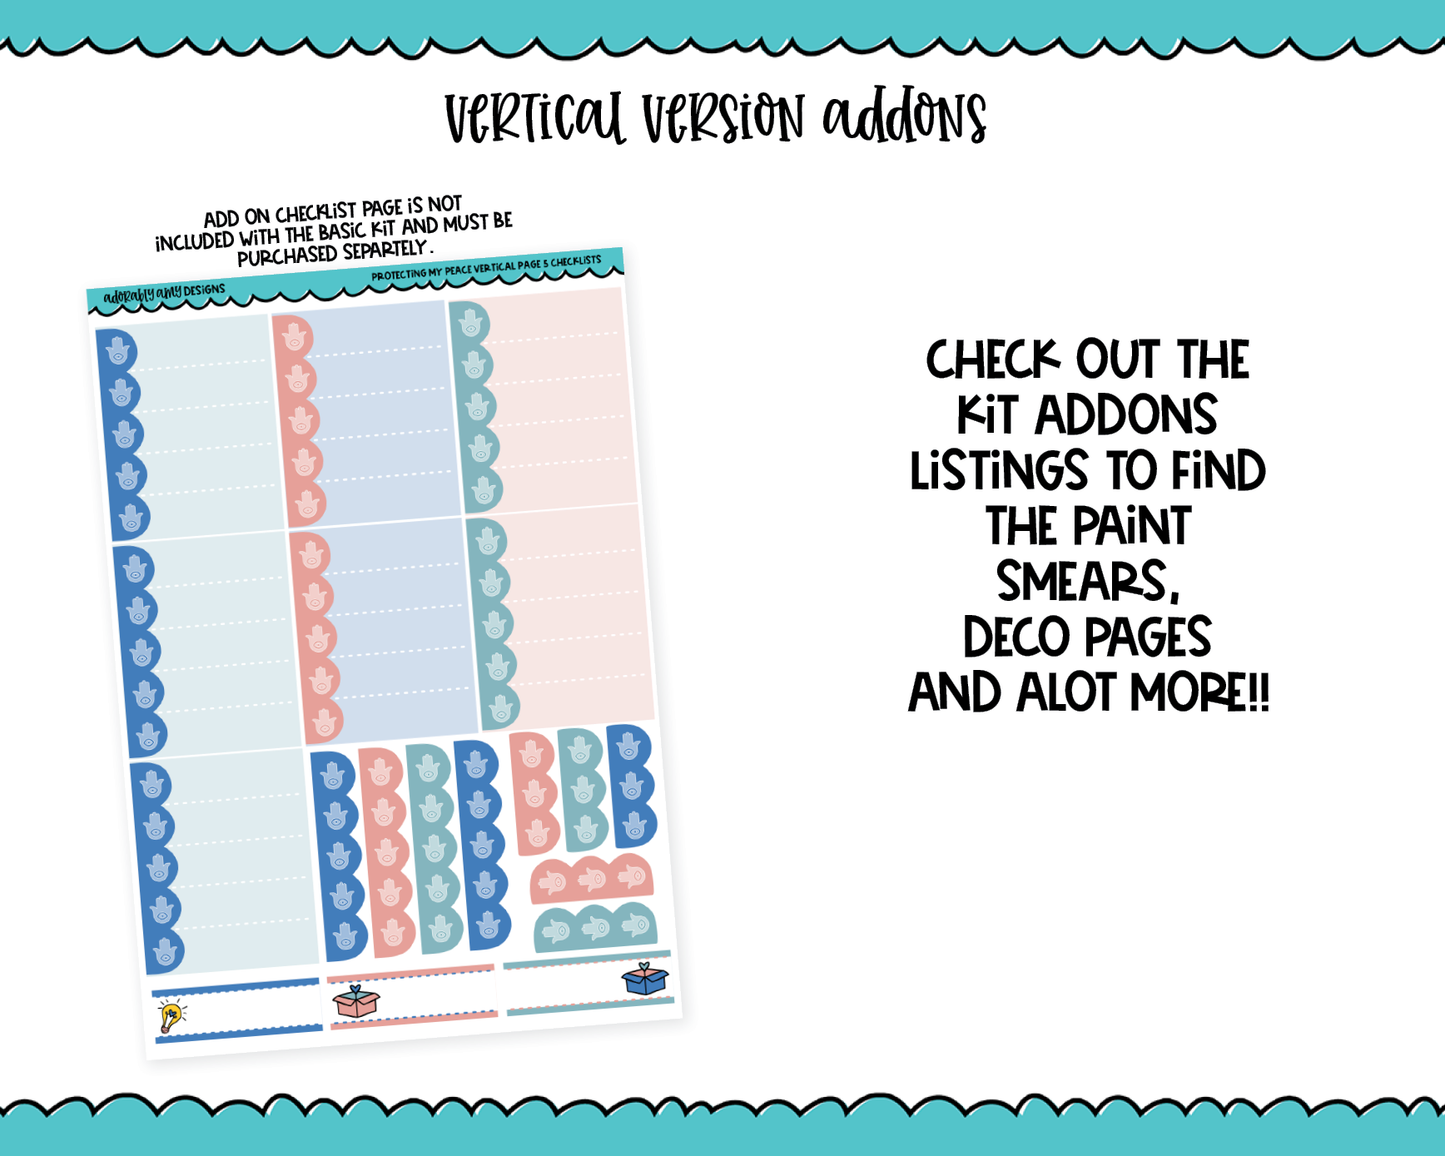 Vertical Protecting My Peace Self Care Self Love Themed Planner Sticker Kit for Vertical Standard Size Planners or Inserts